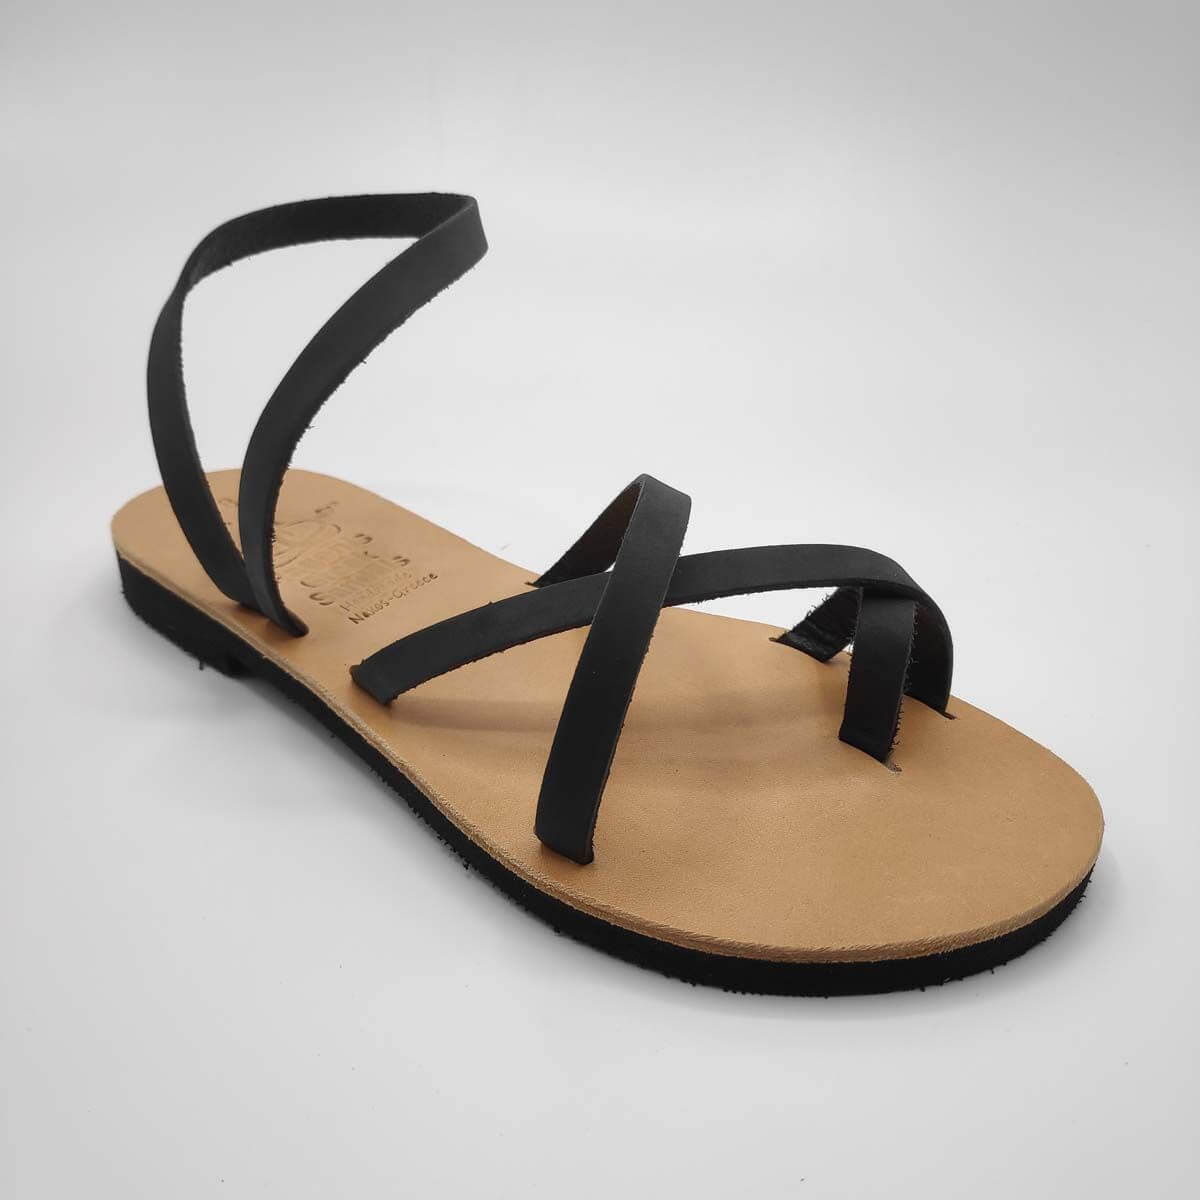 strappy sandals that cover the toes